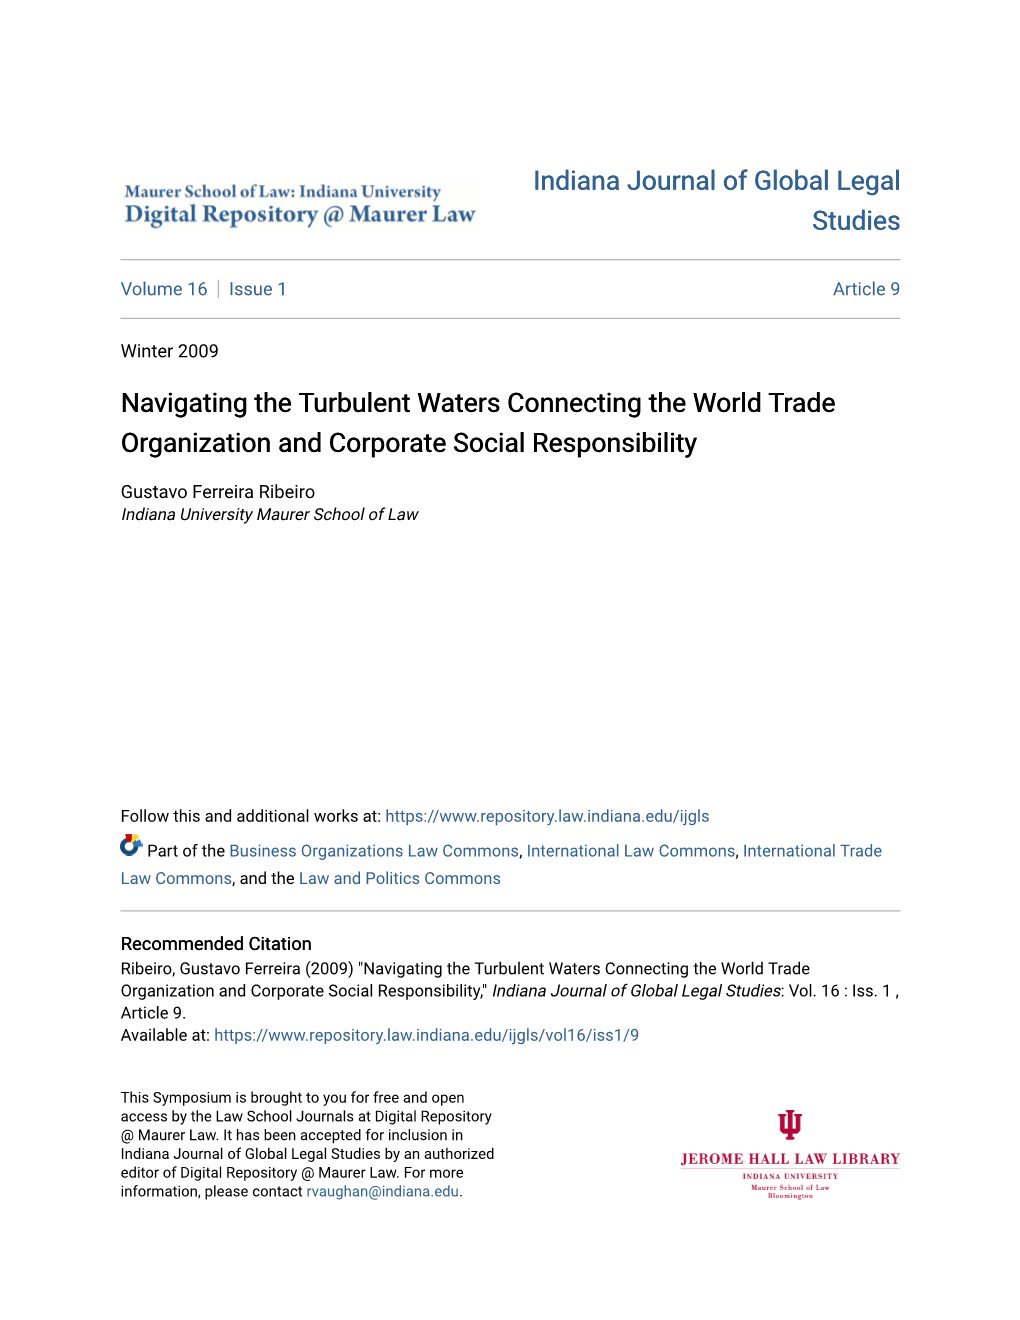 Navigating the Turbulent Waters Connecting the World Trade Organization and Corporate Social Responsibility